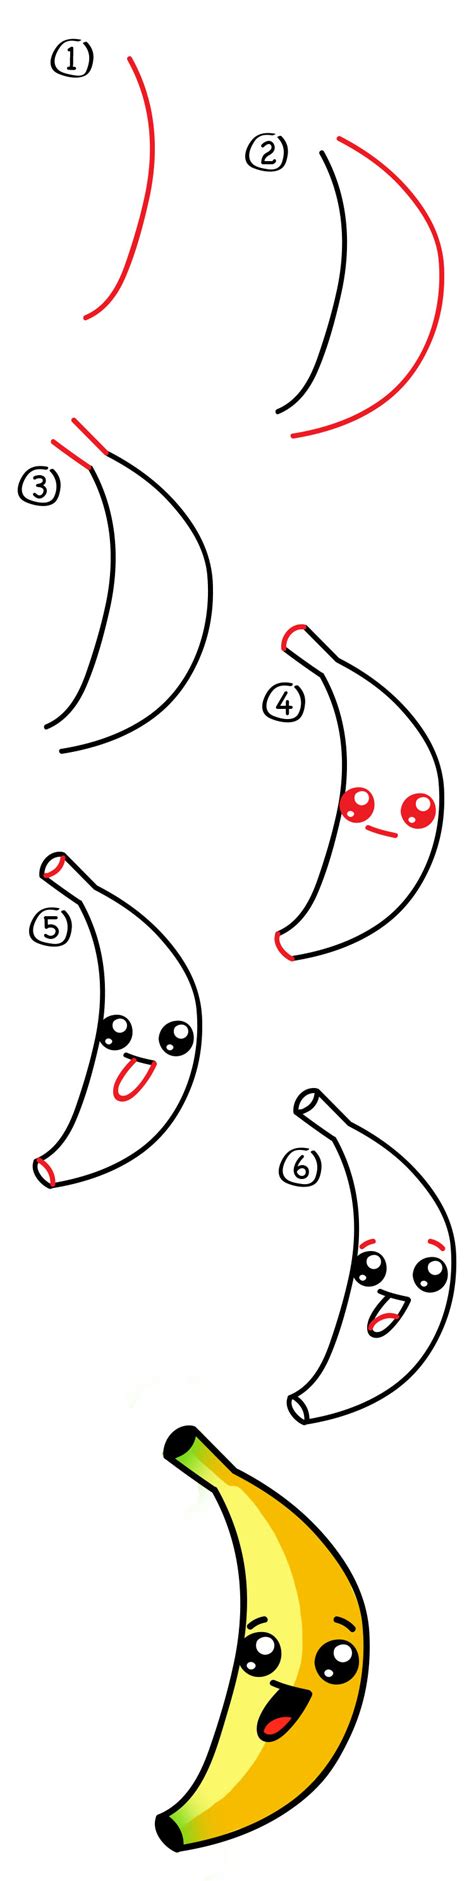 Https://tommynaija.com/draw/how To Draw A Banana With A Face